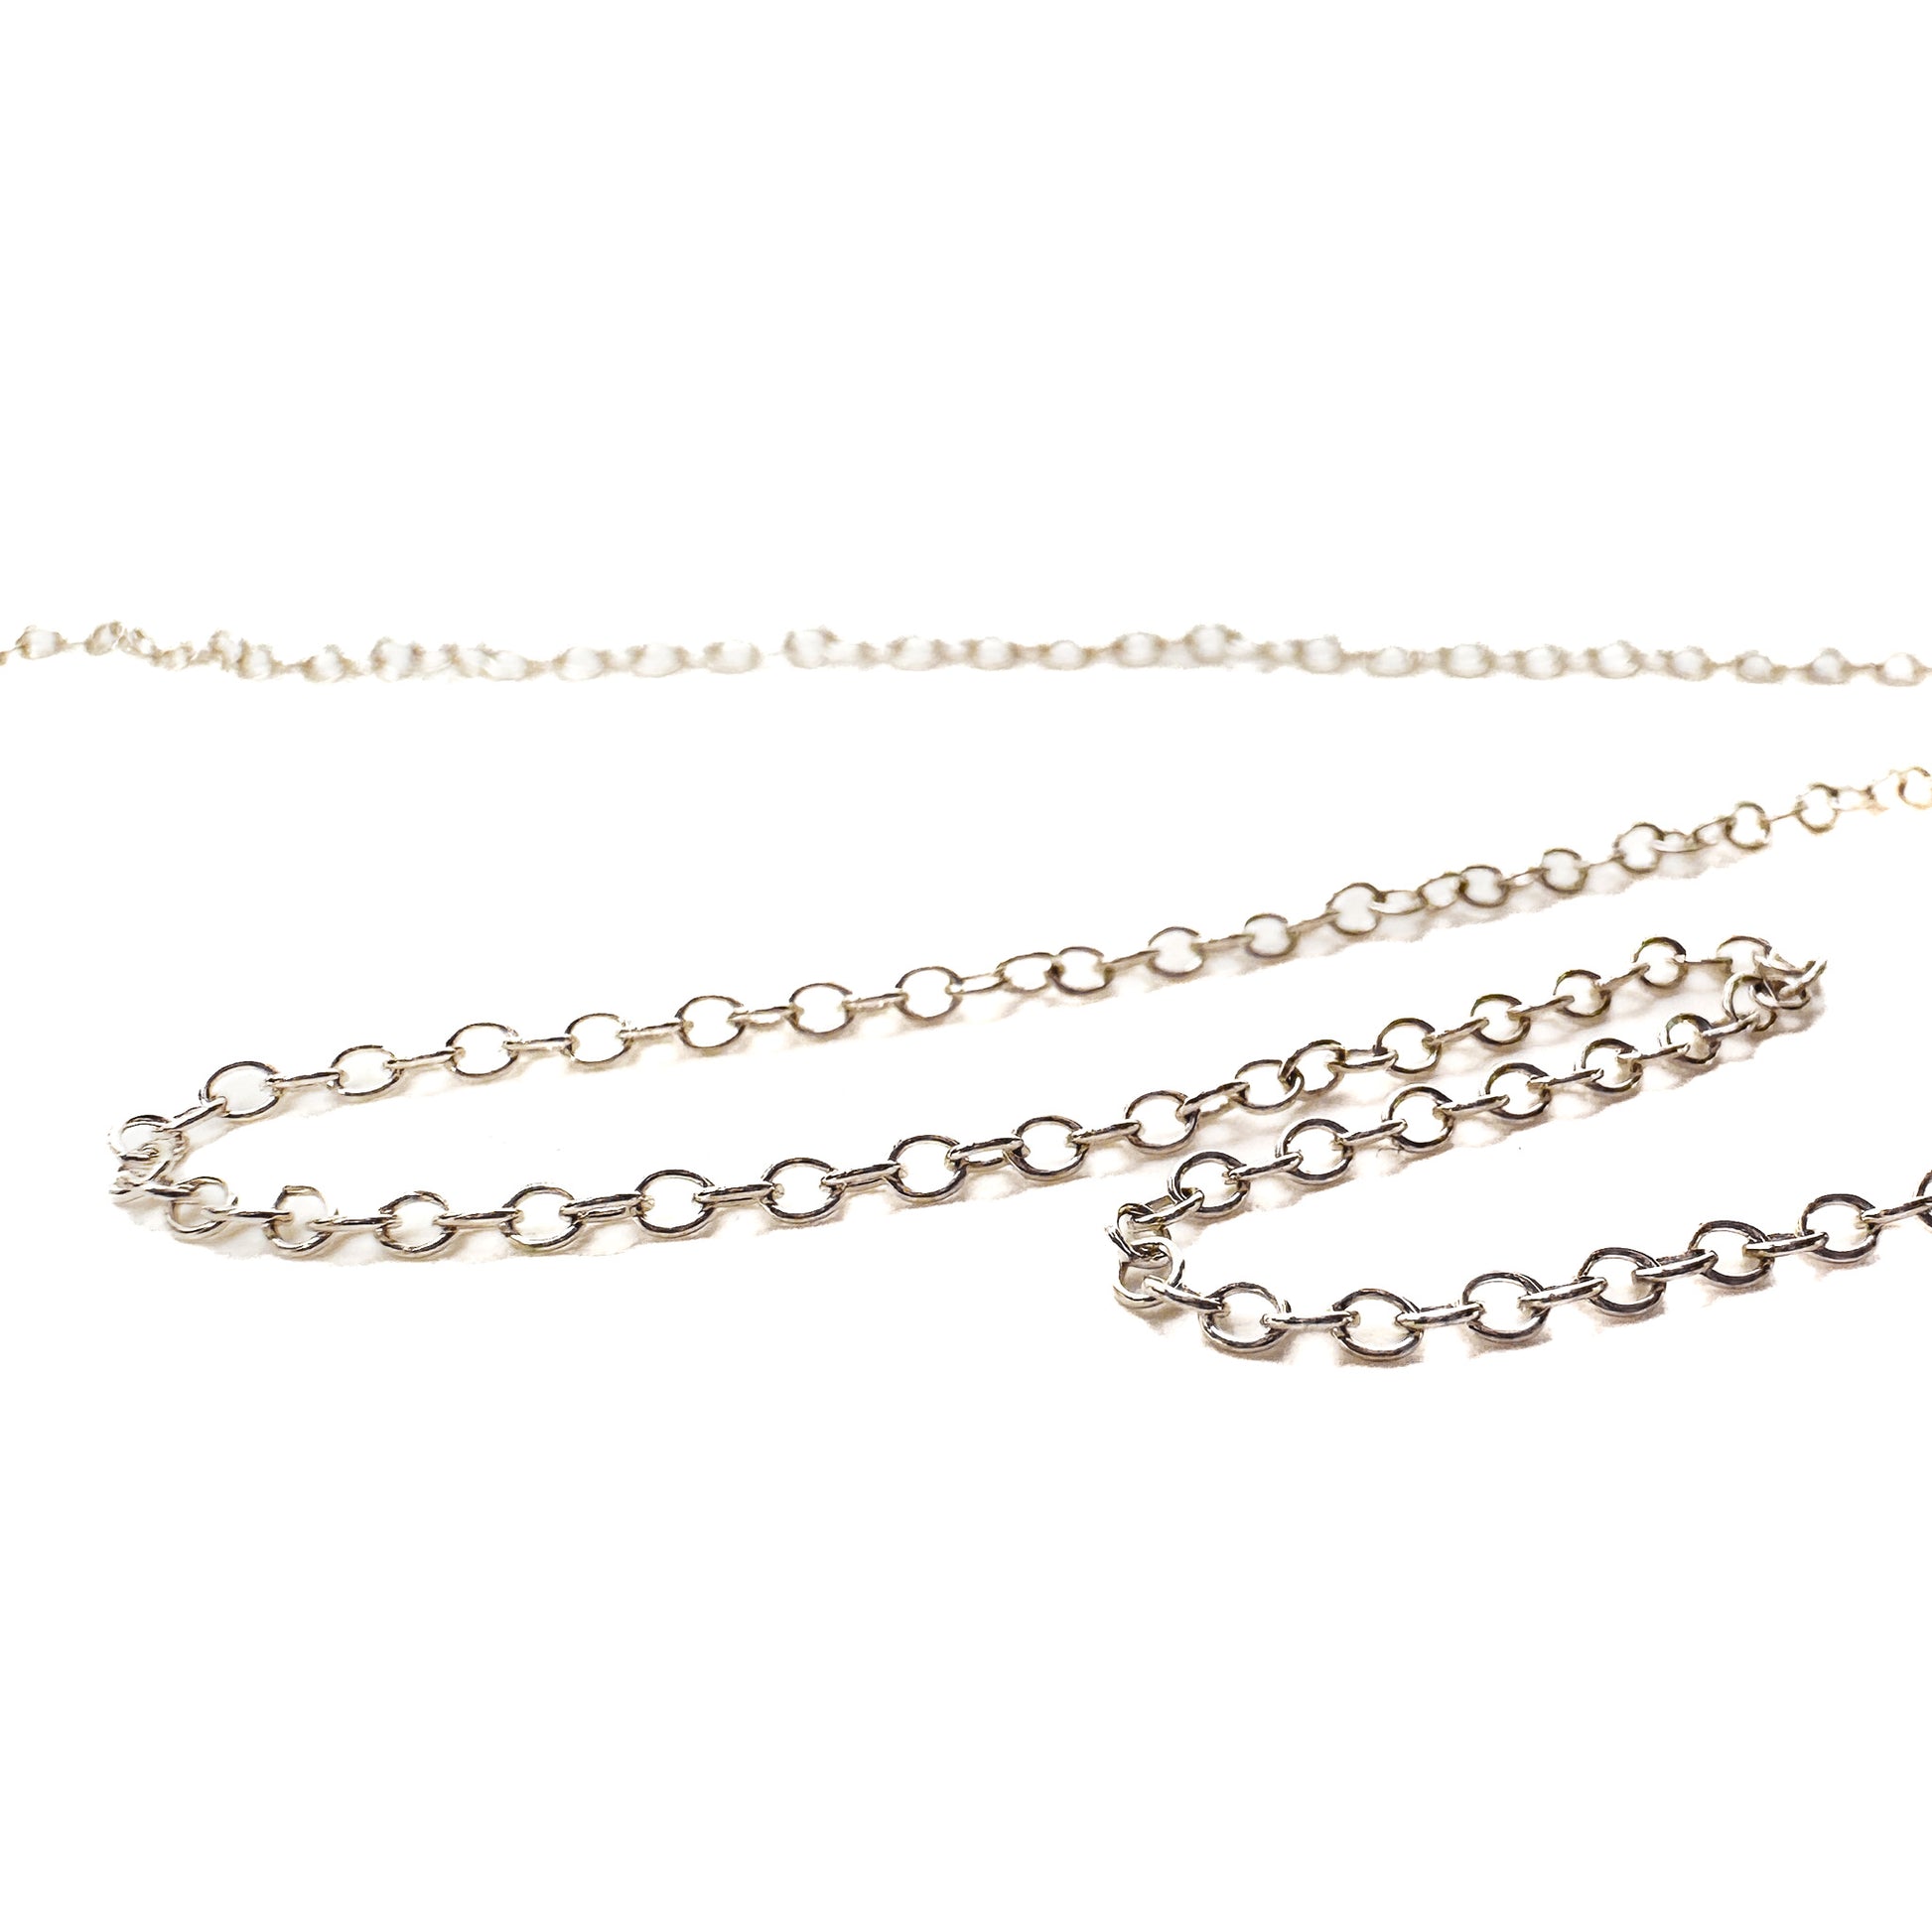 Small Round Cable Chain (Sterling Silver) - 1 ft.-The Bead Gallery Honolulu